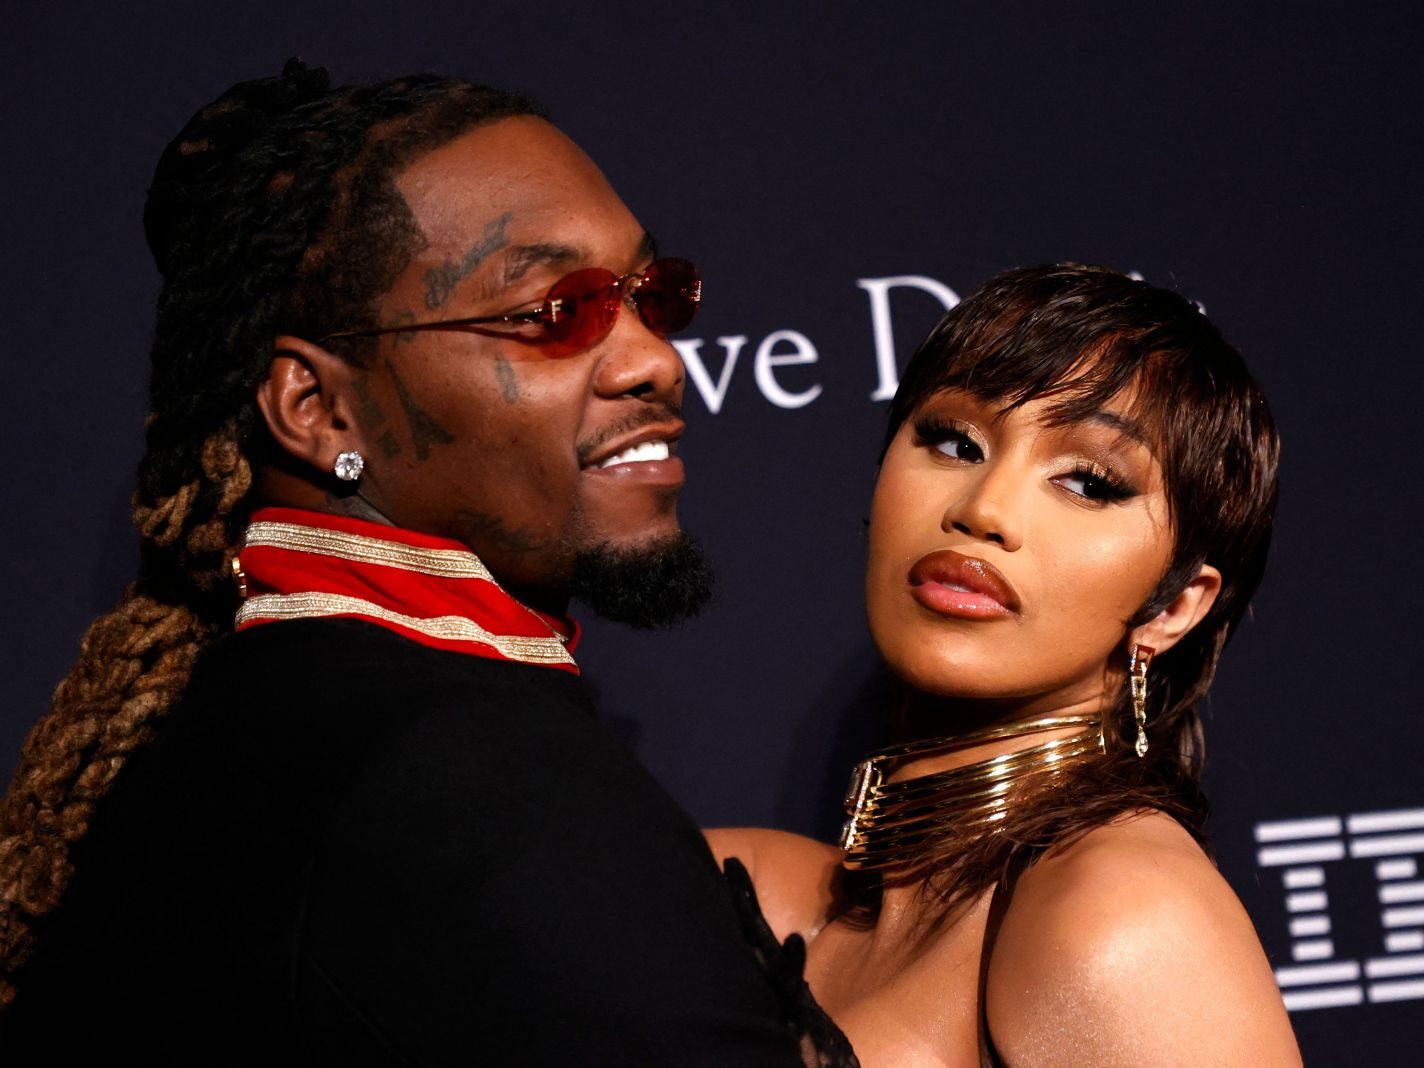 Cardi B Responds to Cheating Allegations Made by Offset: ‘Don’t Play With Me’